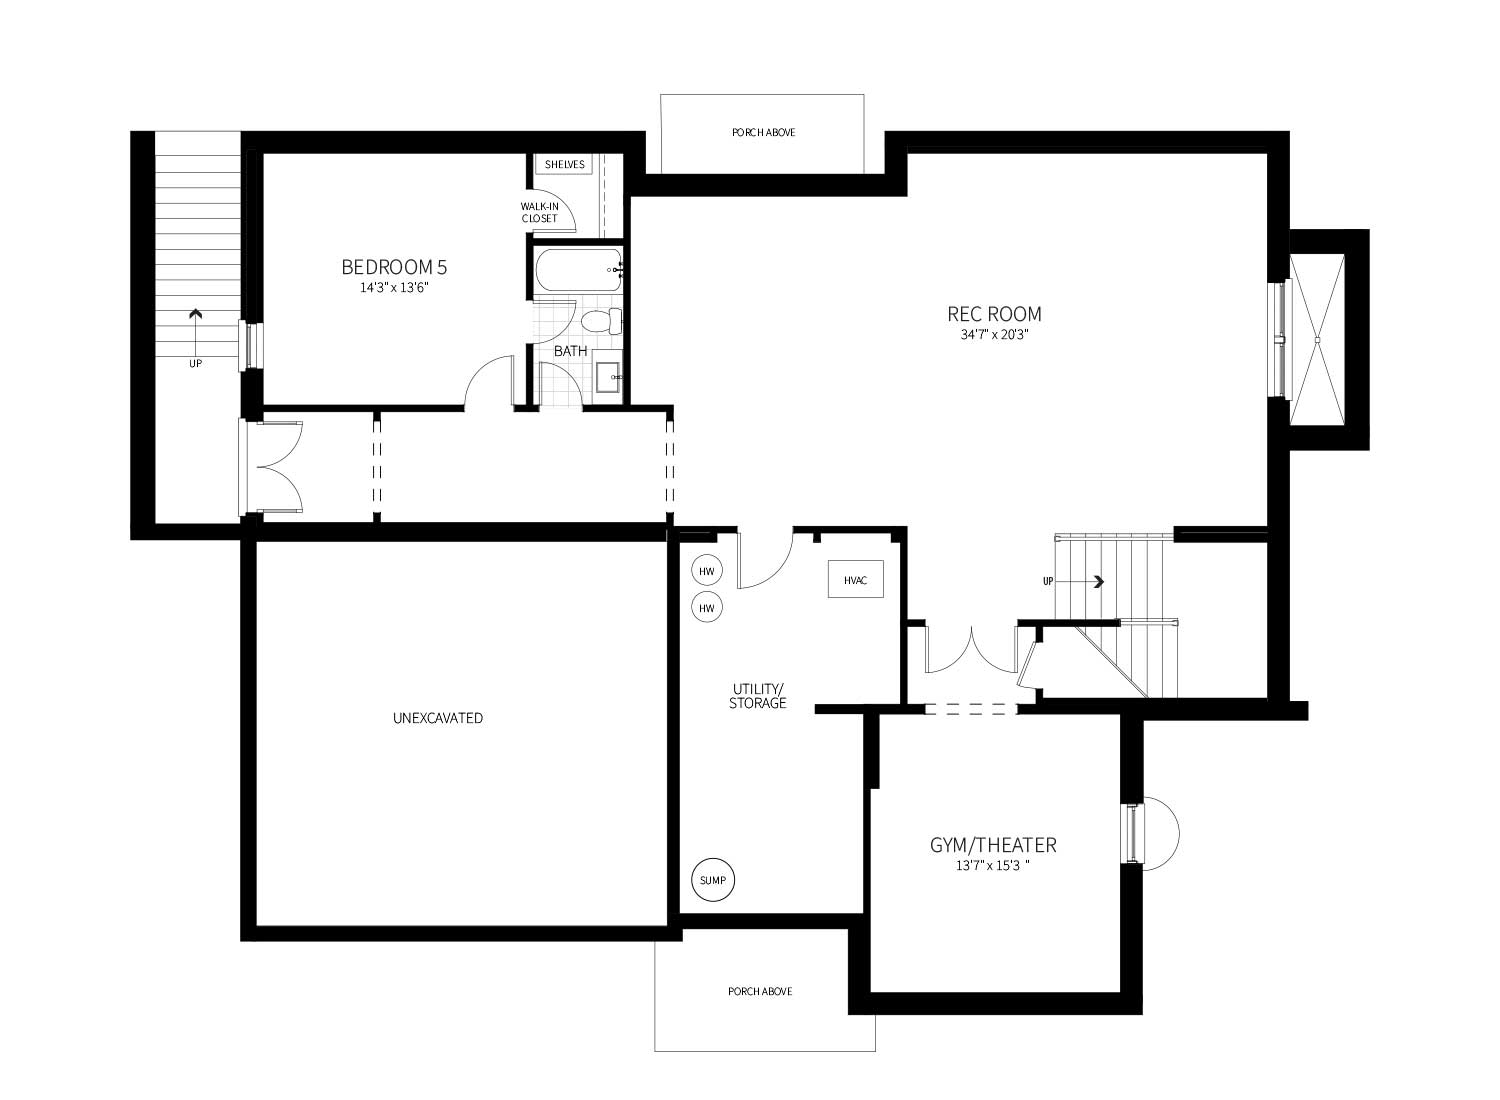 The Basement plan of the Geranium model, showing a Rec Room, Gym/Theater and Bedroom with full Bath.